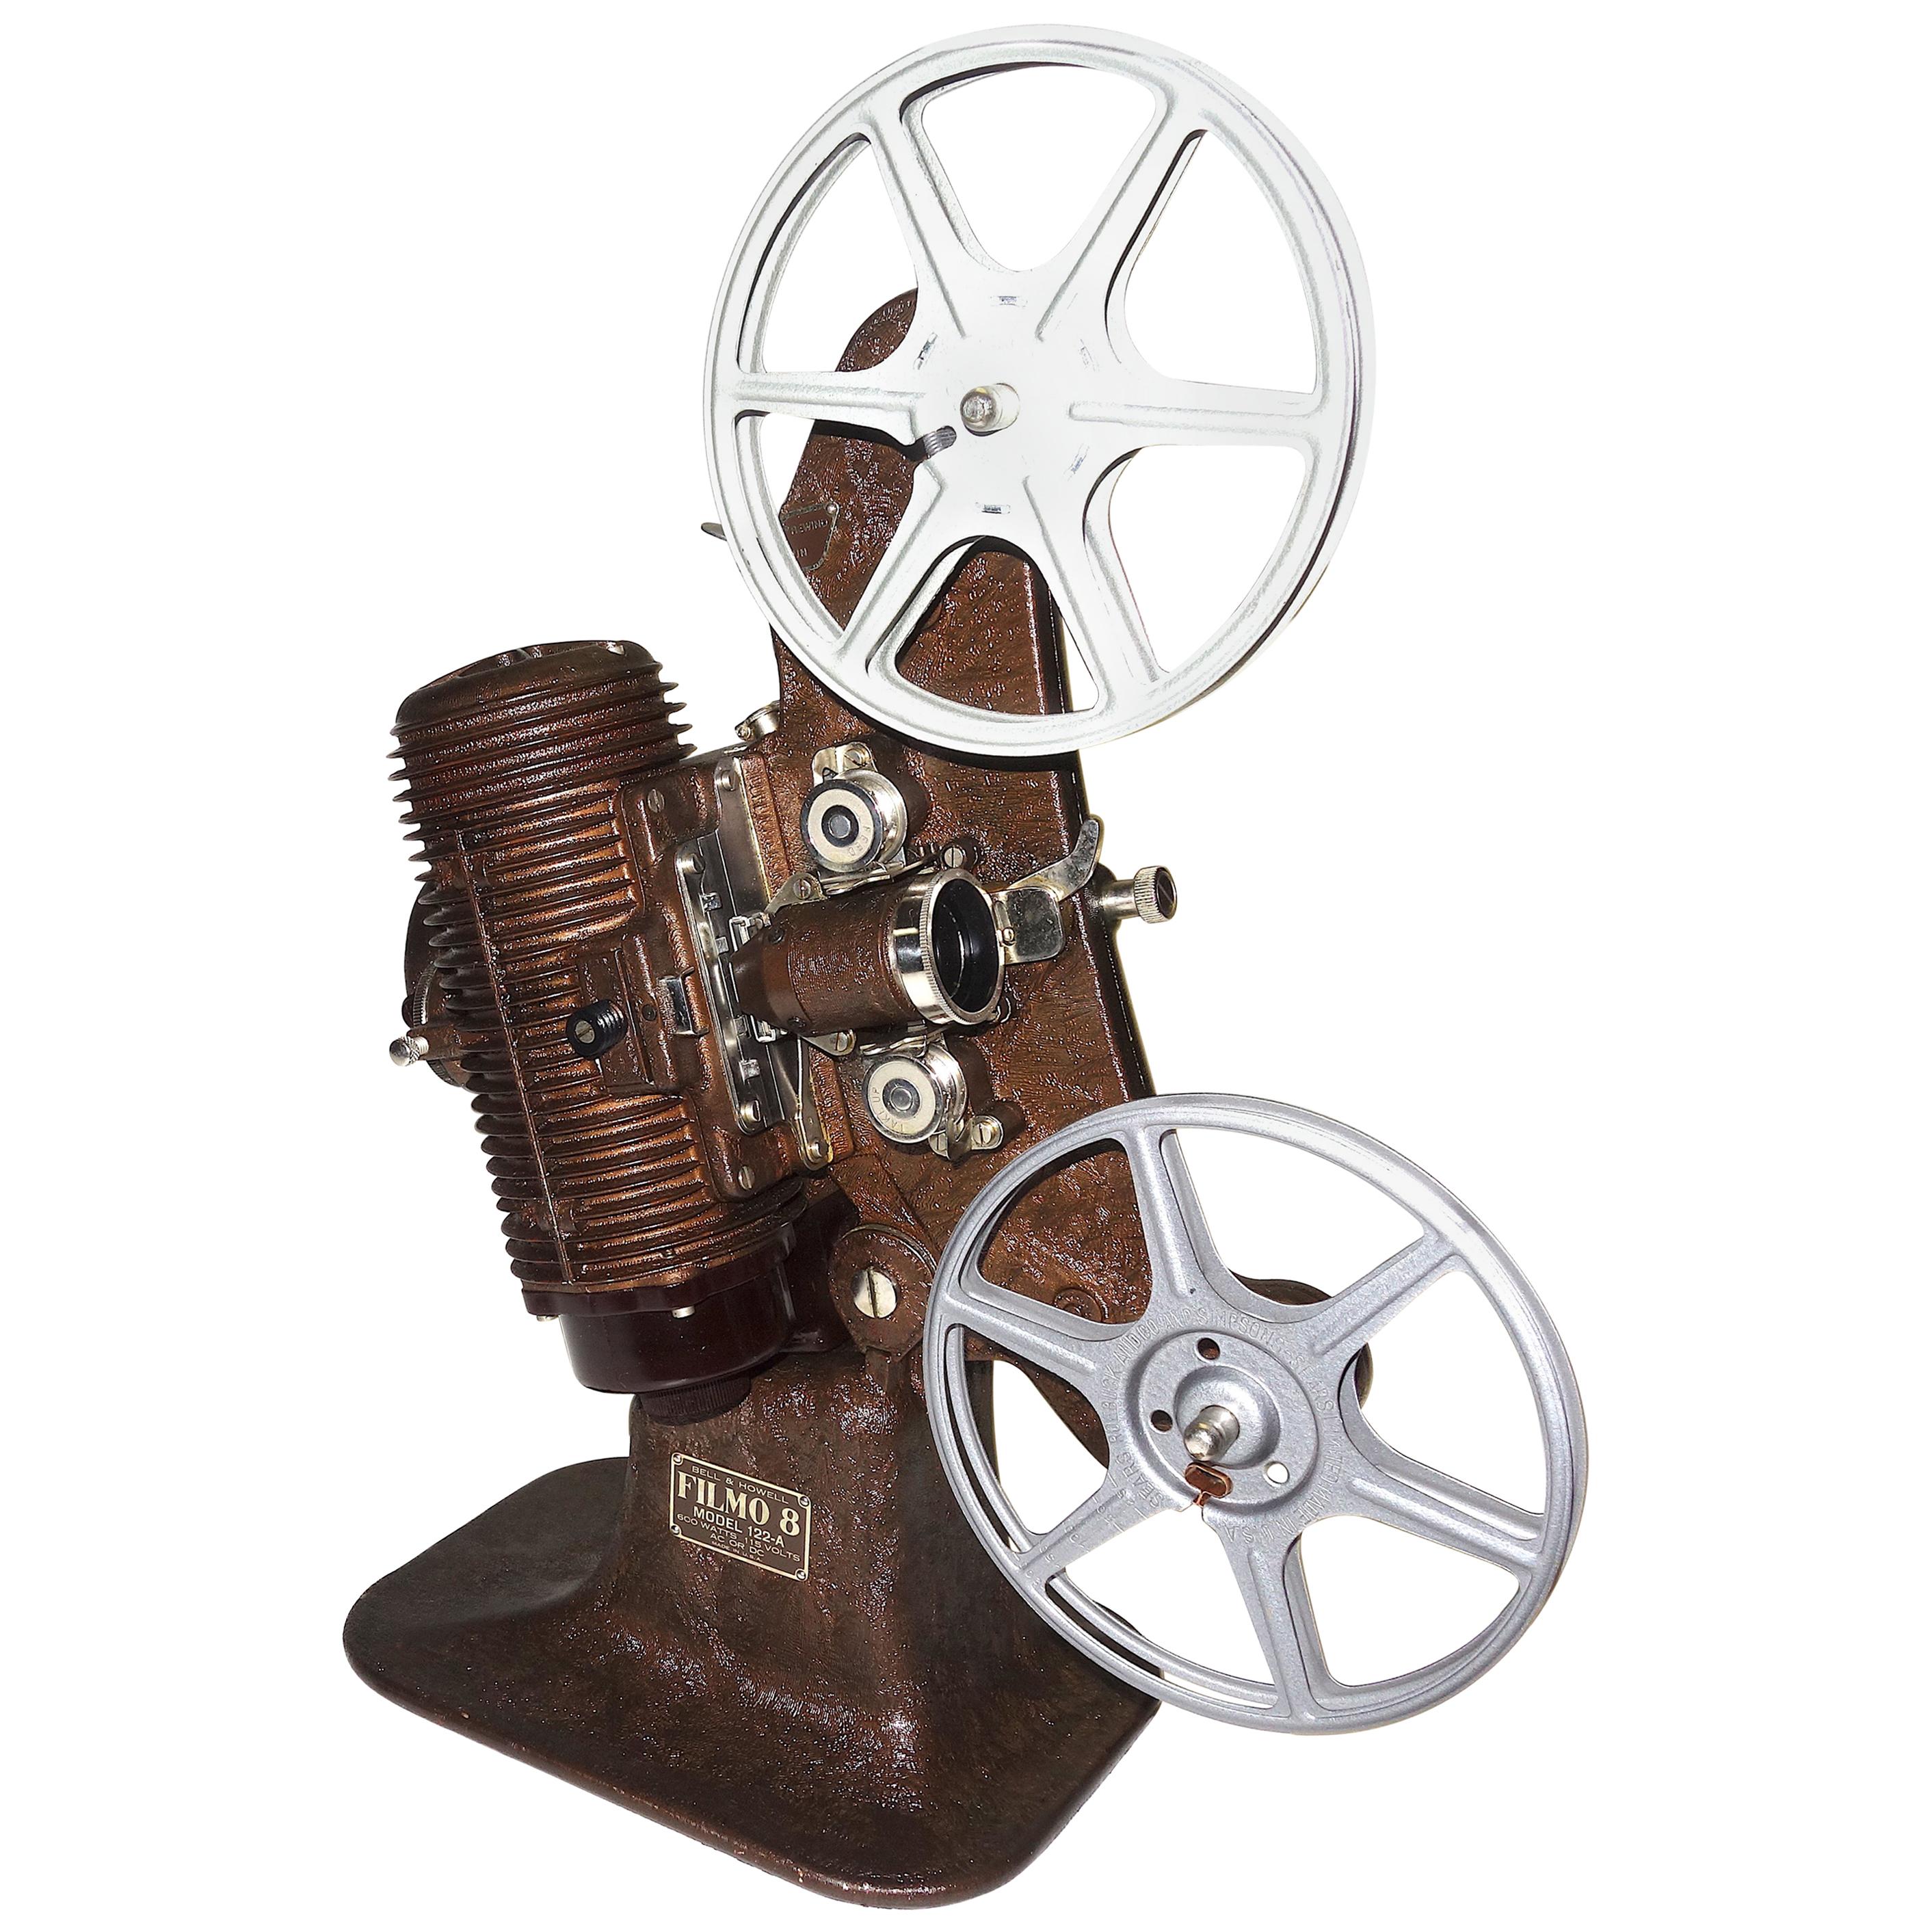 8mm Projector - 3 For Sale on 1stDibs  8mm projector for sale, 8 mm film  projector, 8 mm projector for sale